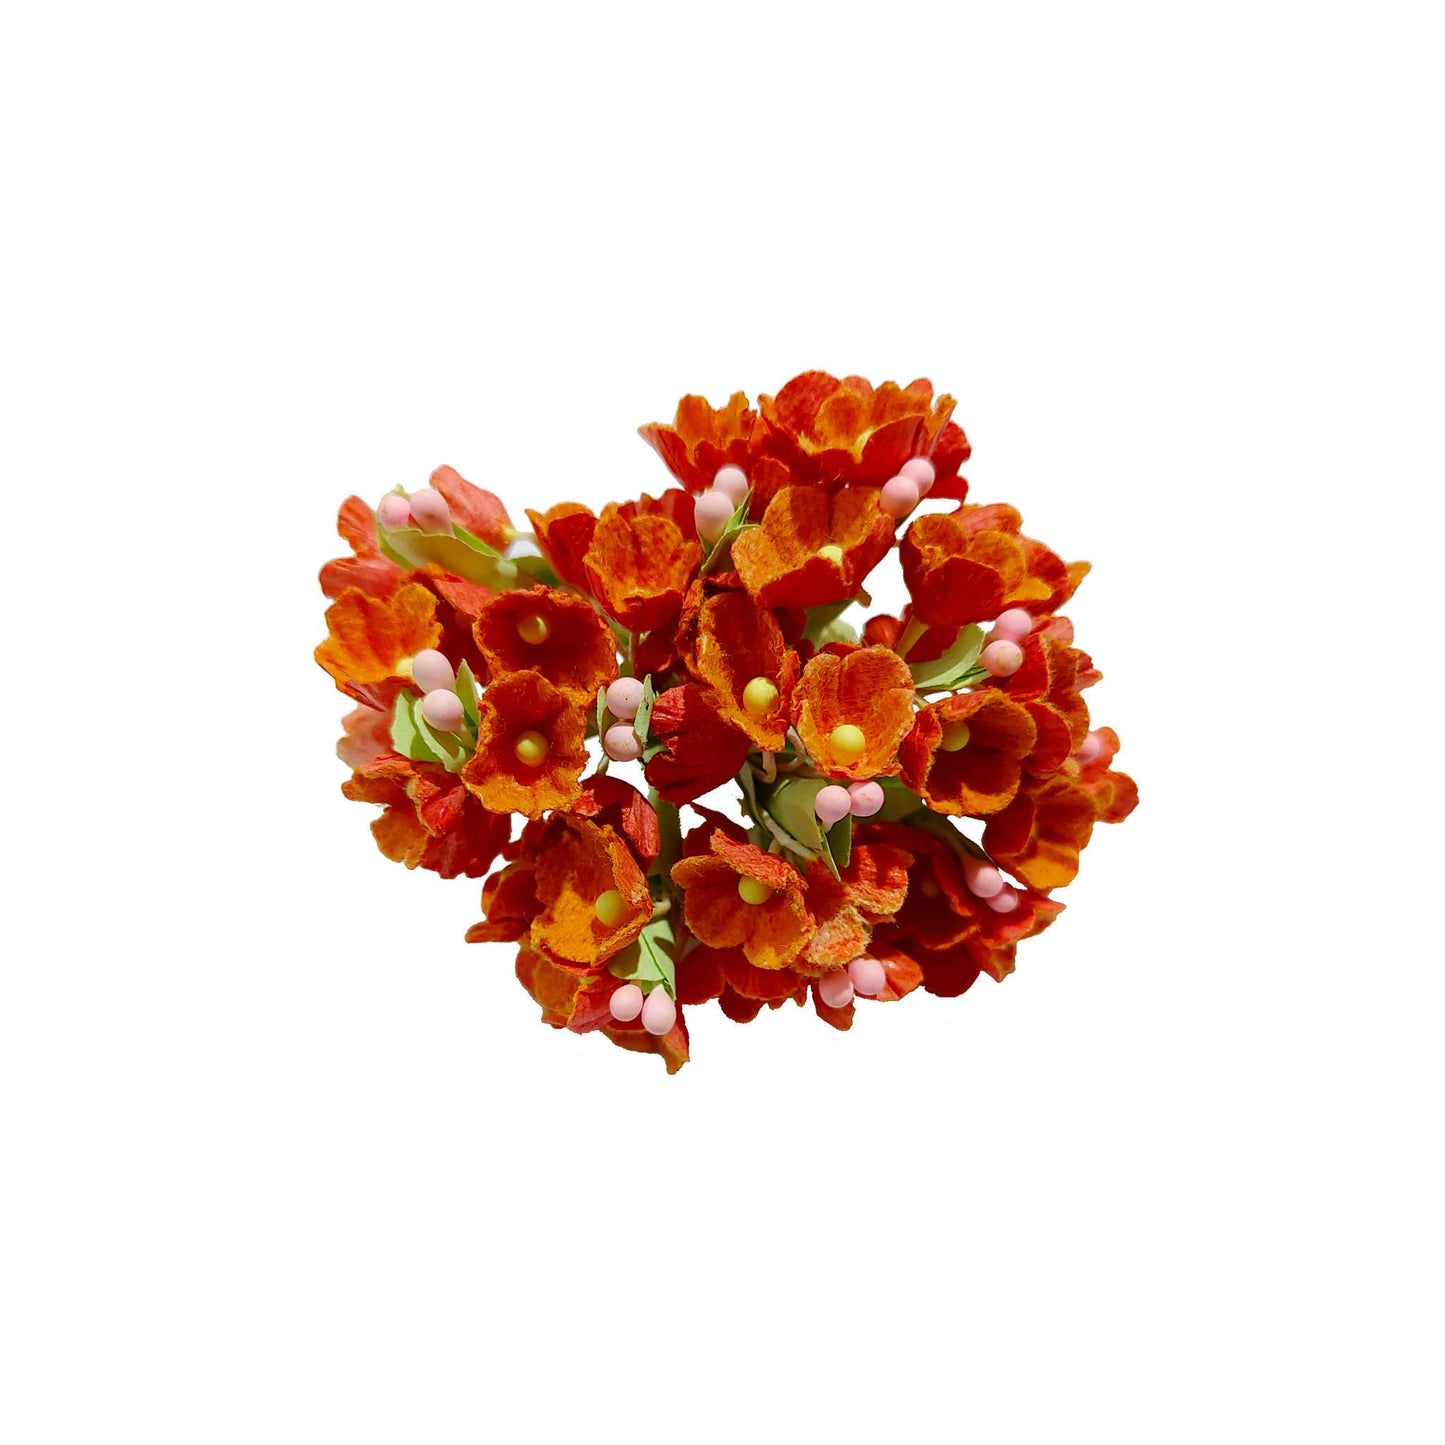 Indian Petals Beautiful Small Paper Flowers for DIY Craft, Trousseau Packing or Decoration - Design 29, Dark Orange